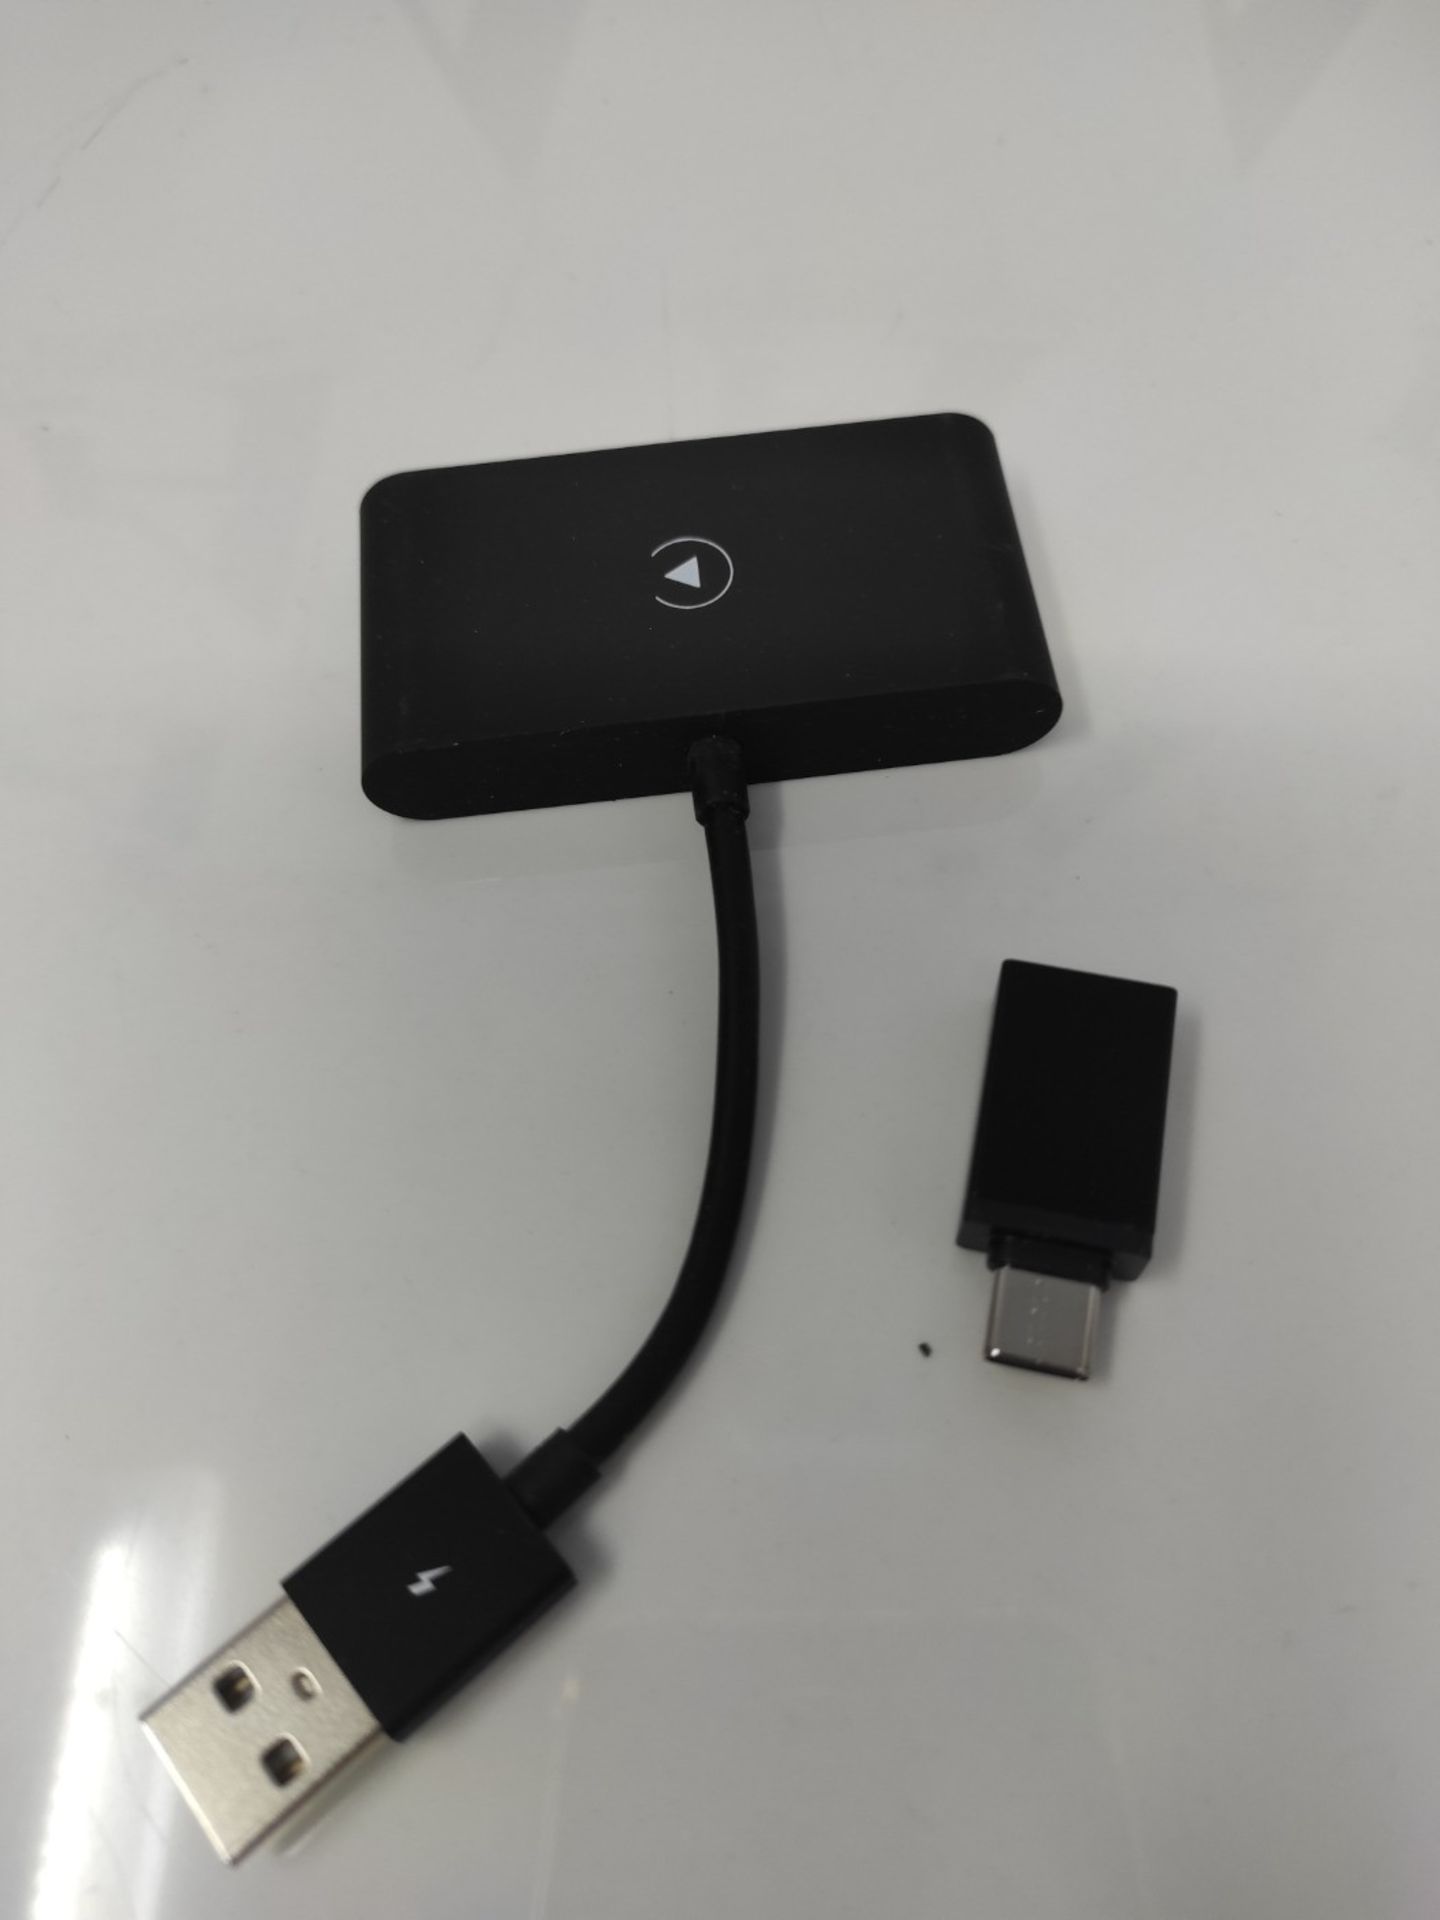 RRP £60.00 USB dongle adapter for iPhone to convert wired CarPlay to wireless, Bluetooth, automat - Image 2 of 3